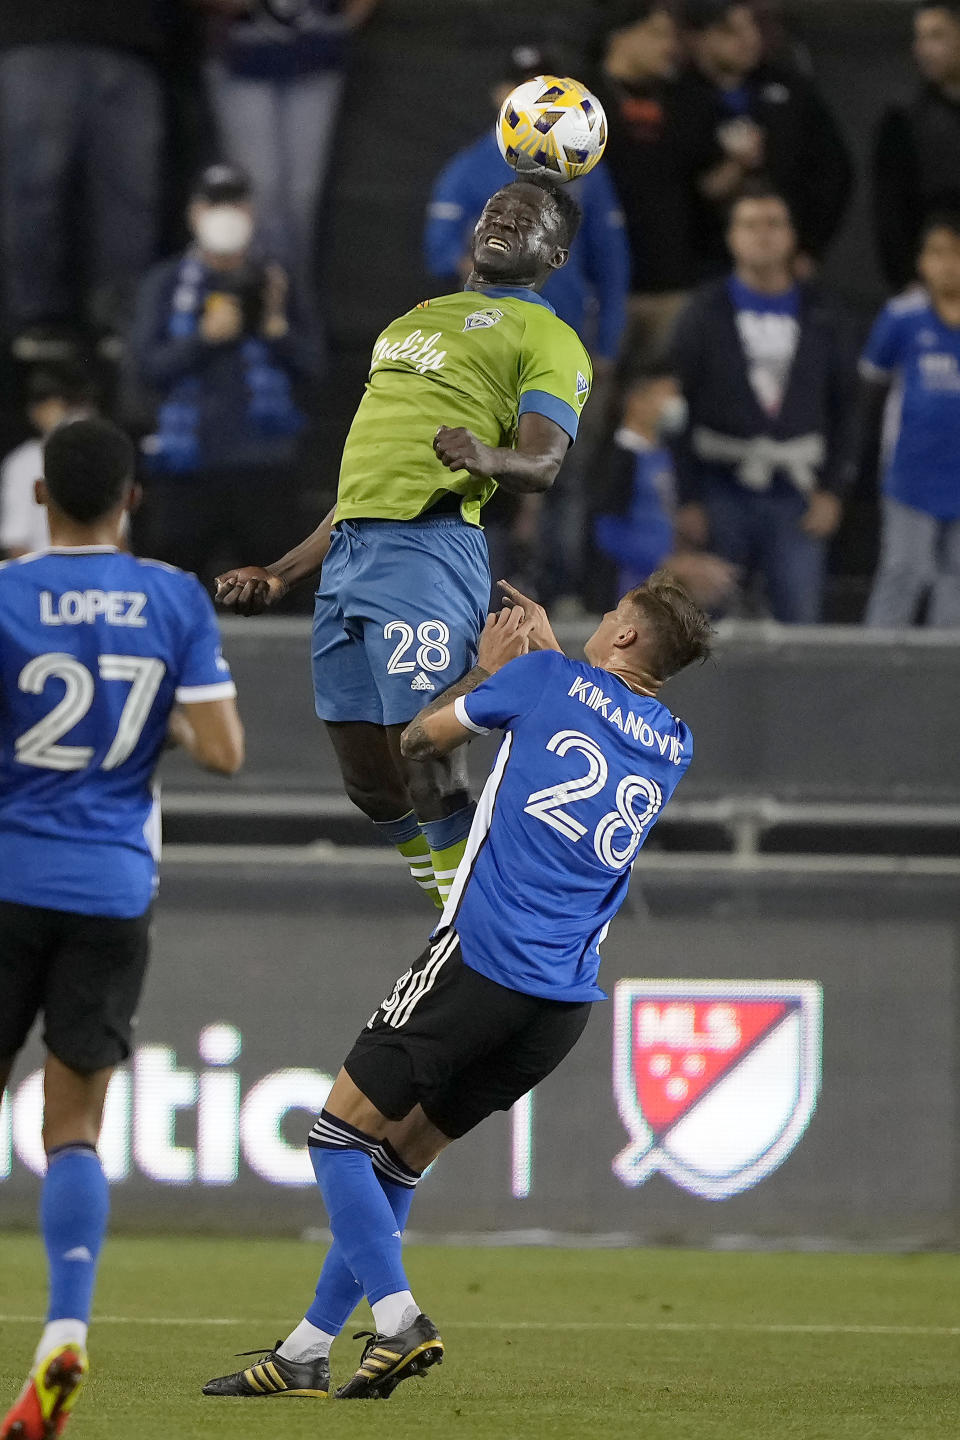 Seattle Sounders defender Yeimar Gomez (28) goes up for a header against San Jose Earthquakes forward Benji Kikanovic (28) during the first half of an MLS soccer match Wednesday, Sept. 29, 2021, in San Jose, Calif.(AP Photo/Tony Avelar)